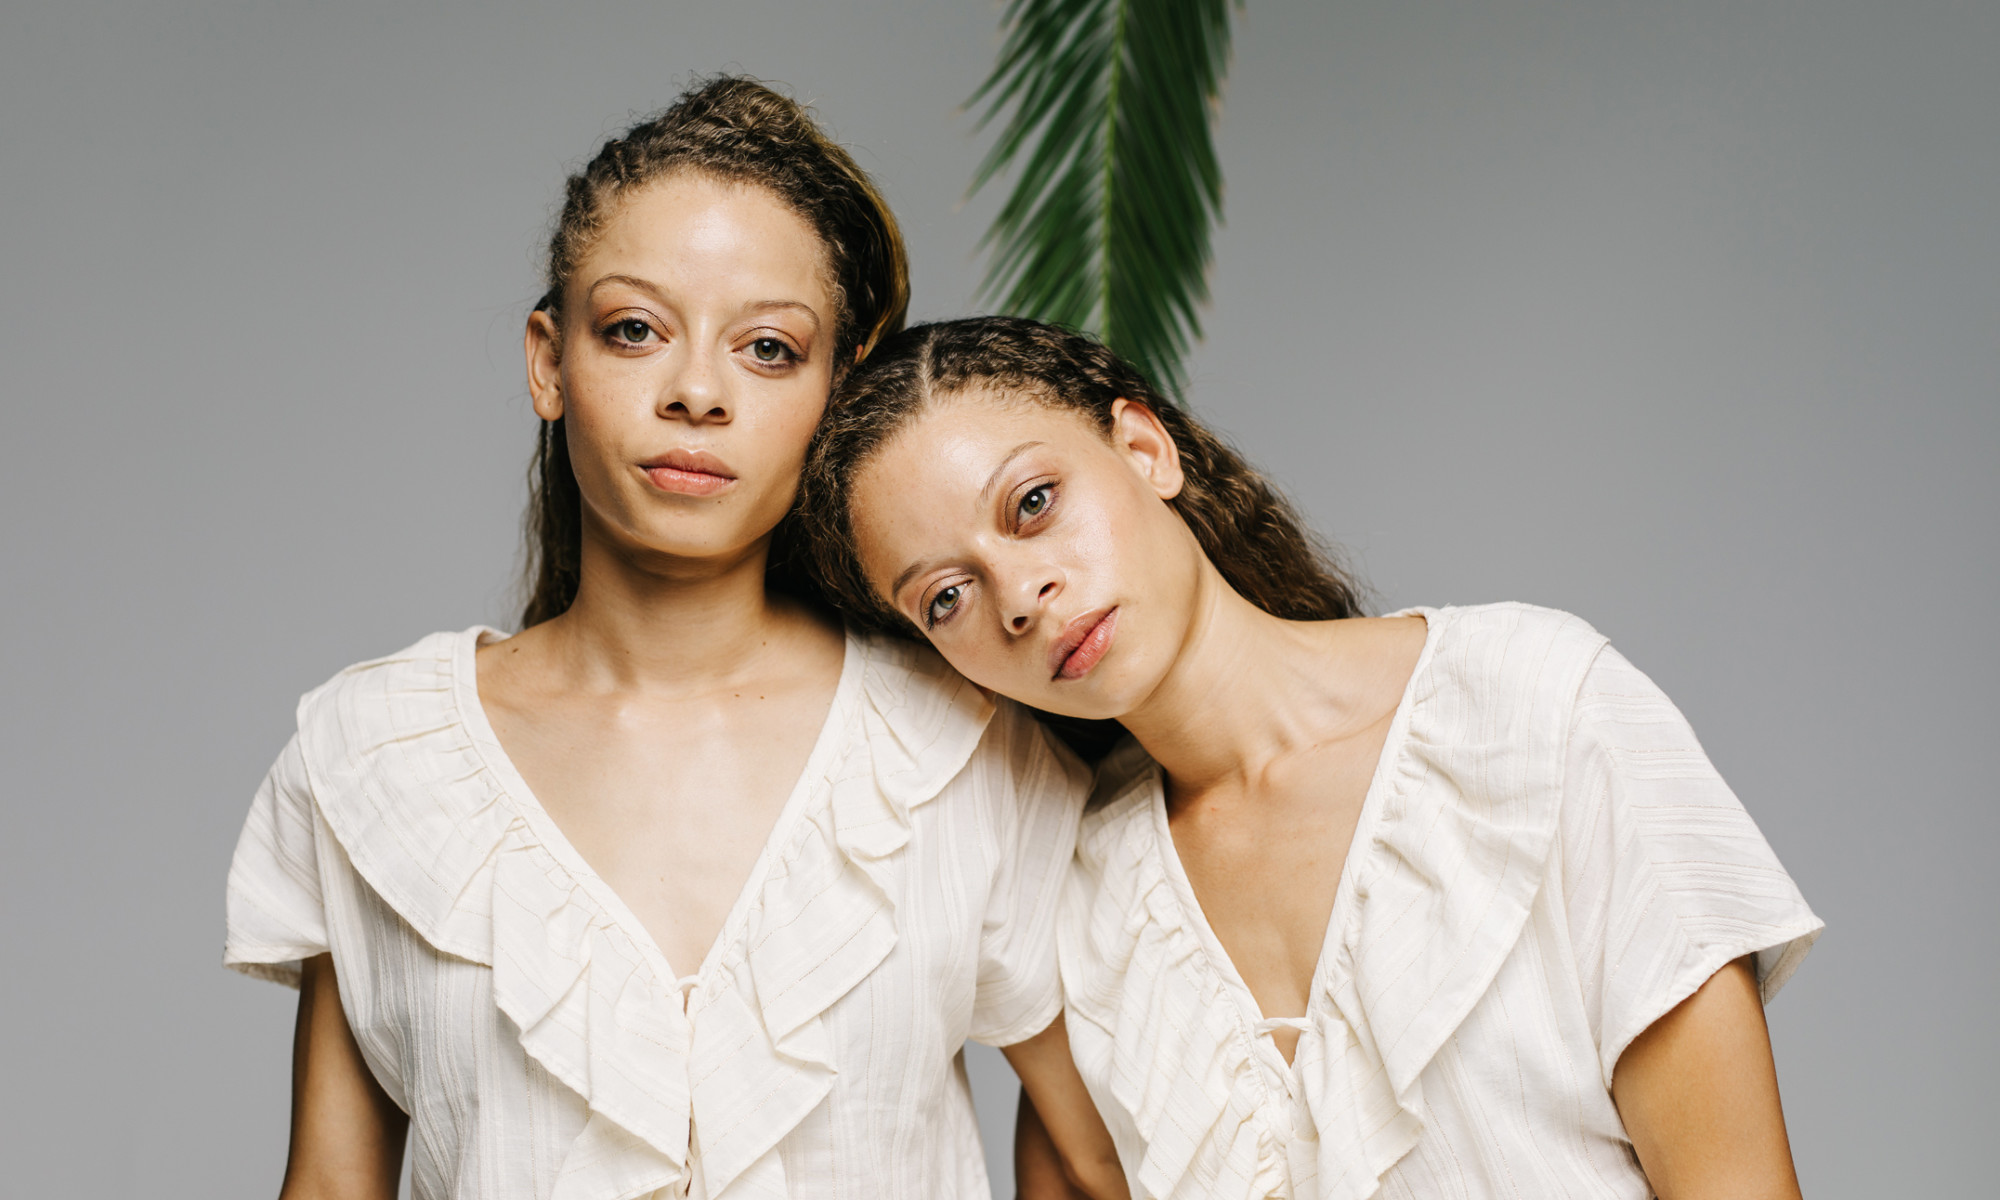 What It Means To Have A Twin Flame + 7 Signs You've Met Yours